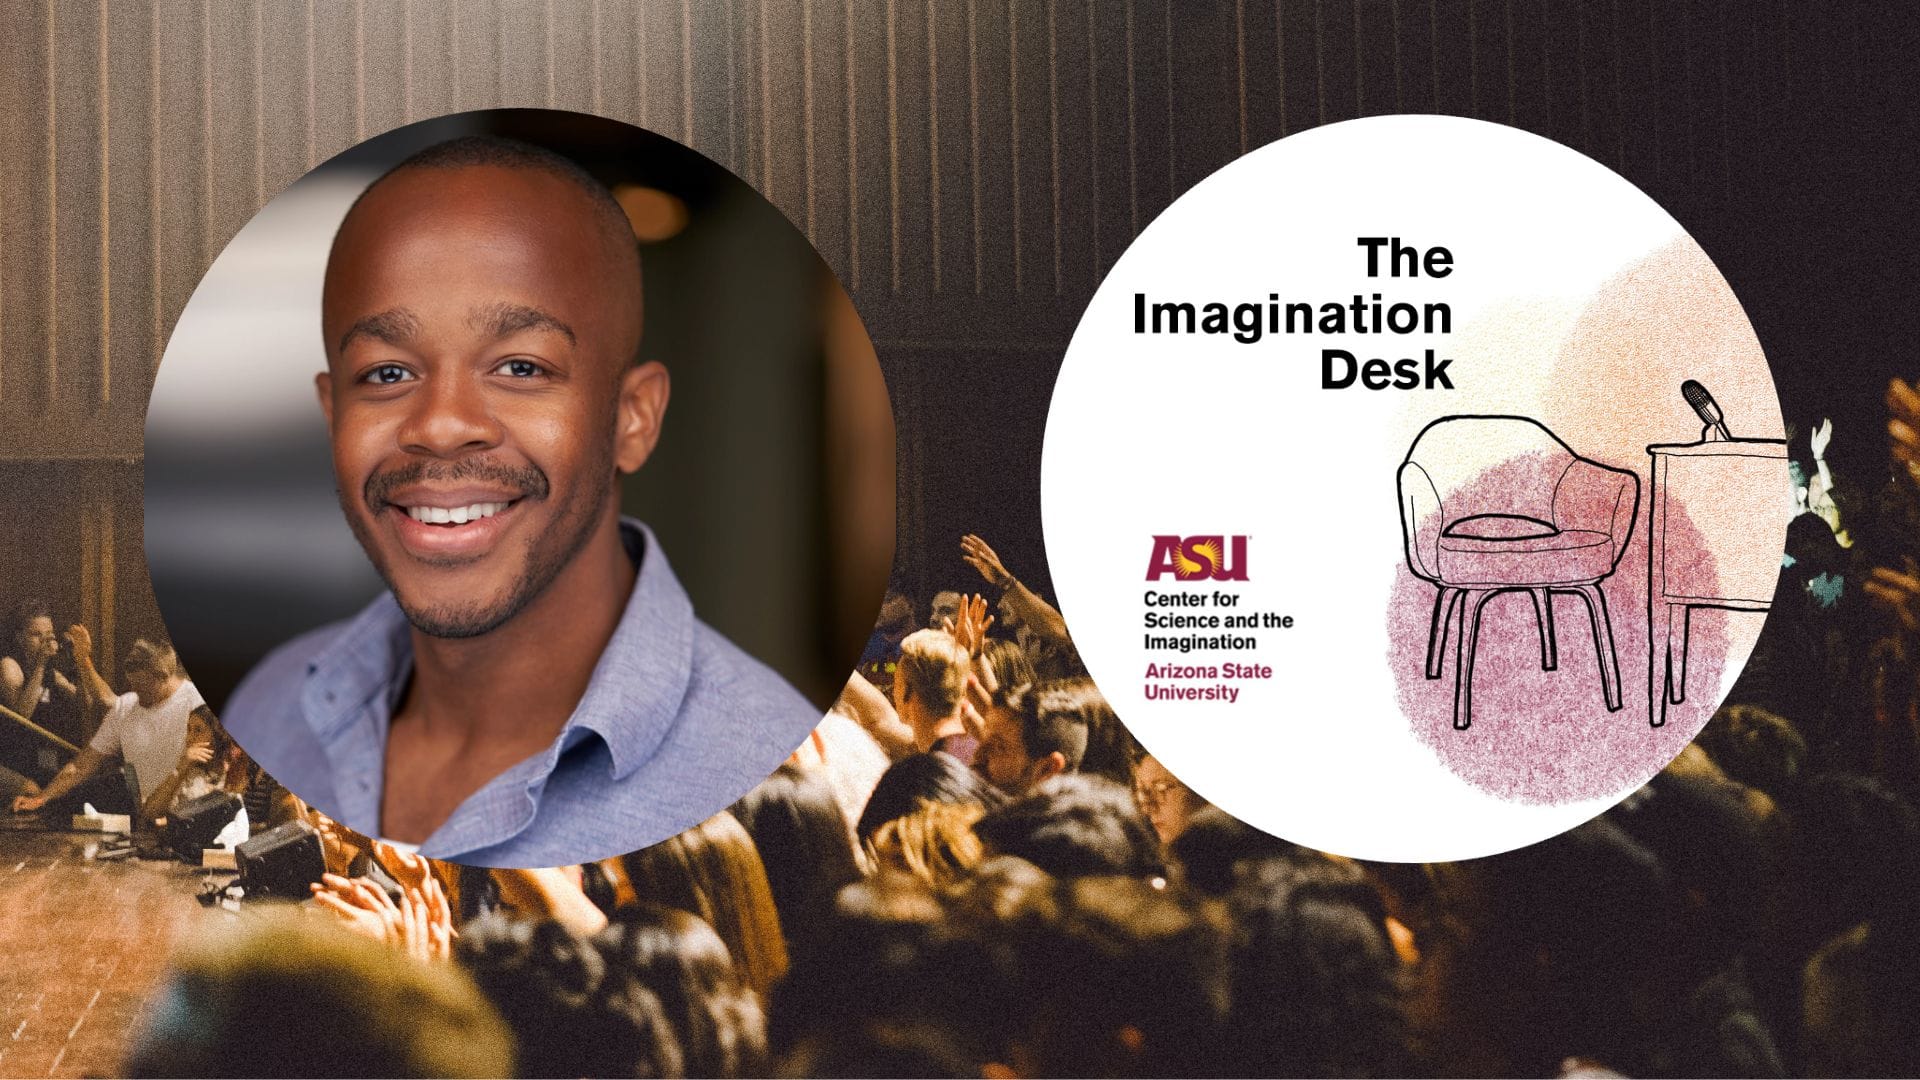 Fabrice Guerrier Discusses “Creating the Futures We Desire” on The Imagination Desk Podcast at The Center For Science and The Imagination